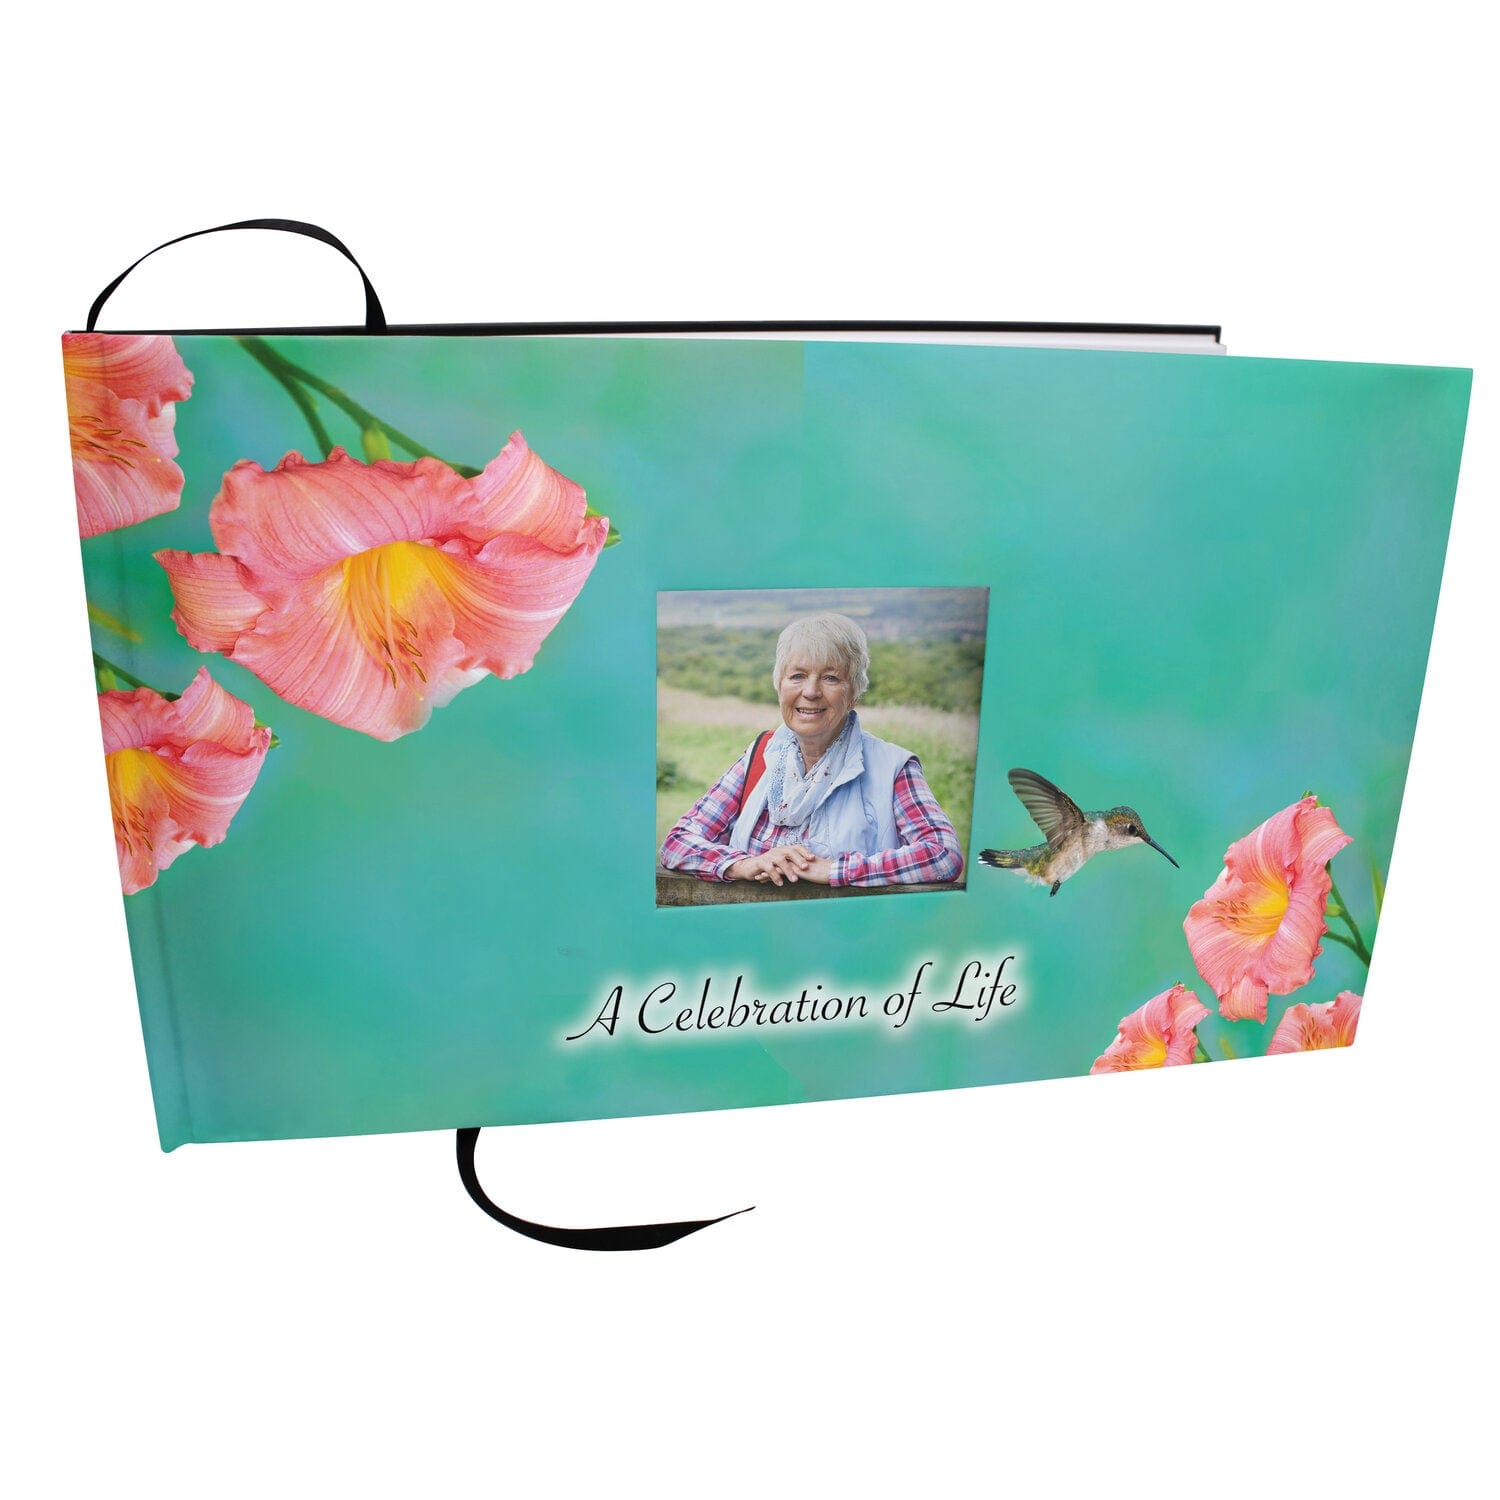 Commemorative Cremation Urns Hummingbird Matching Themed 'Celebration of Life' Guest Book for Funeral or Memorial Service